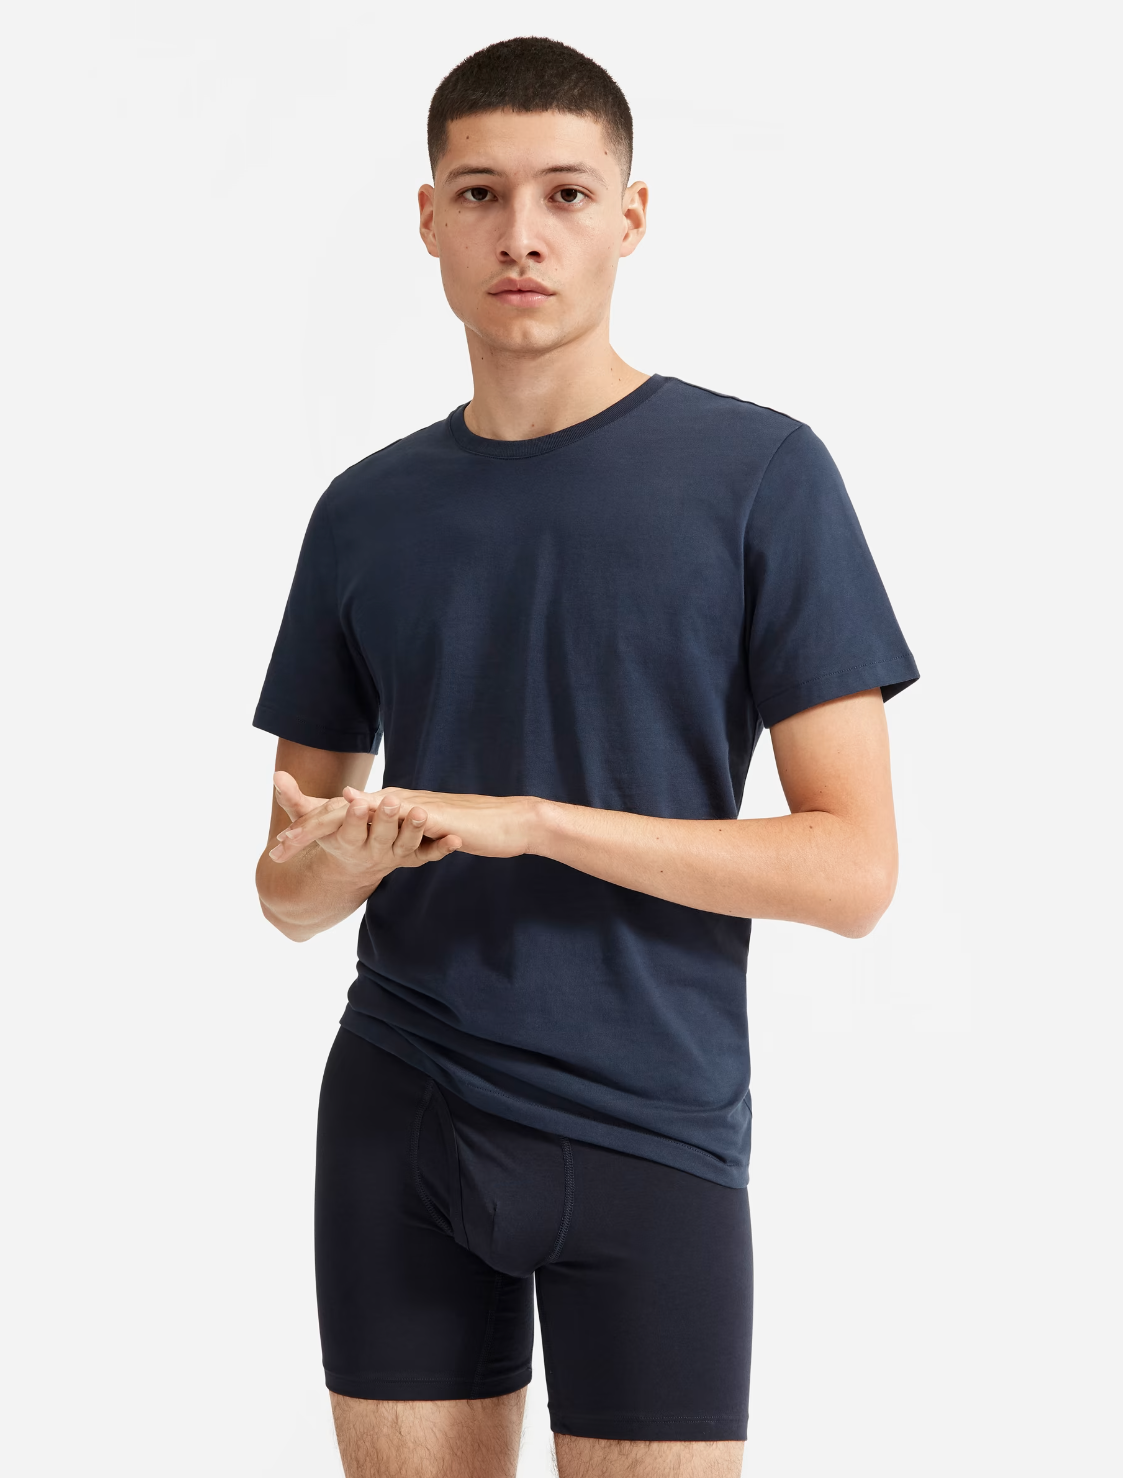 A model in a navy tee and dark boxer briefs.